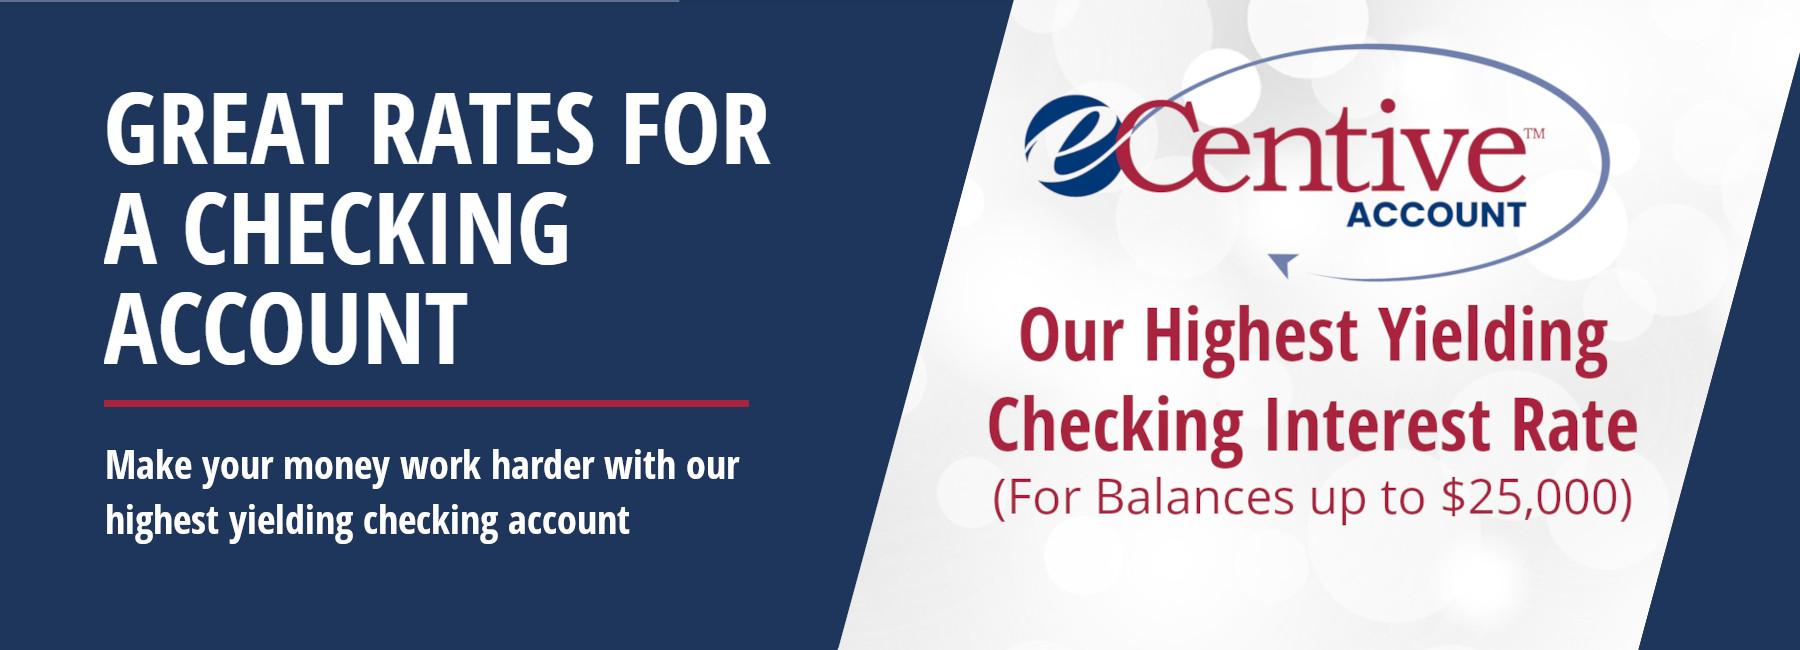 Best Checking Account